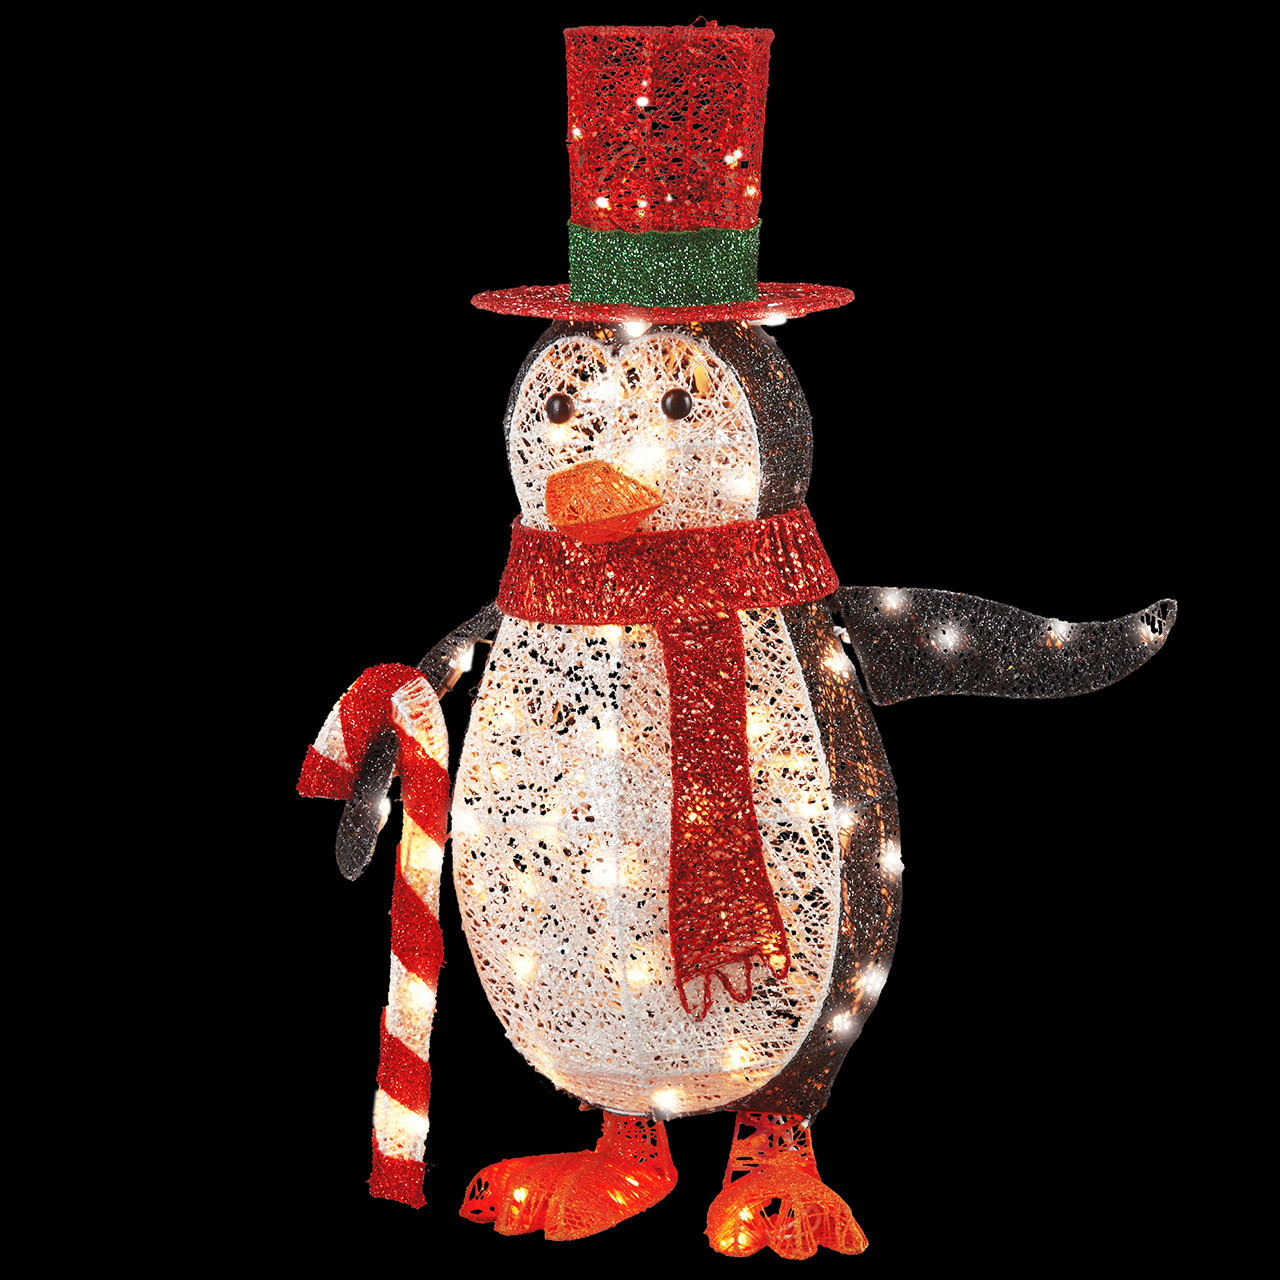 33 in. Penguin with Red Top Hat, Candy Cane, and 100 LED Lights